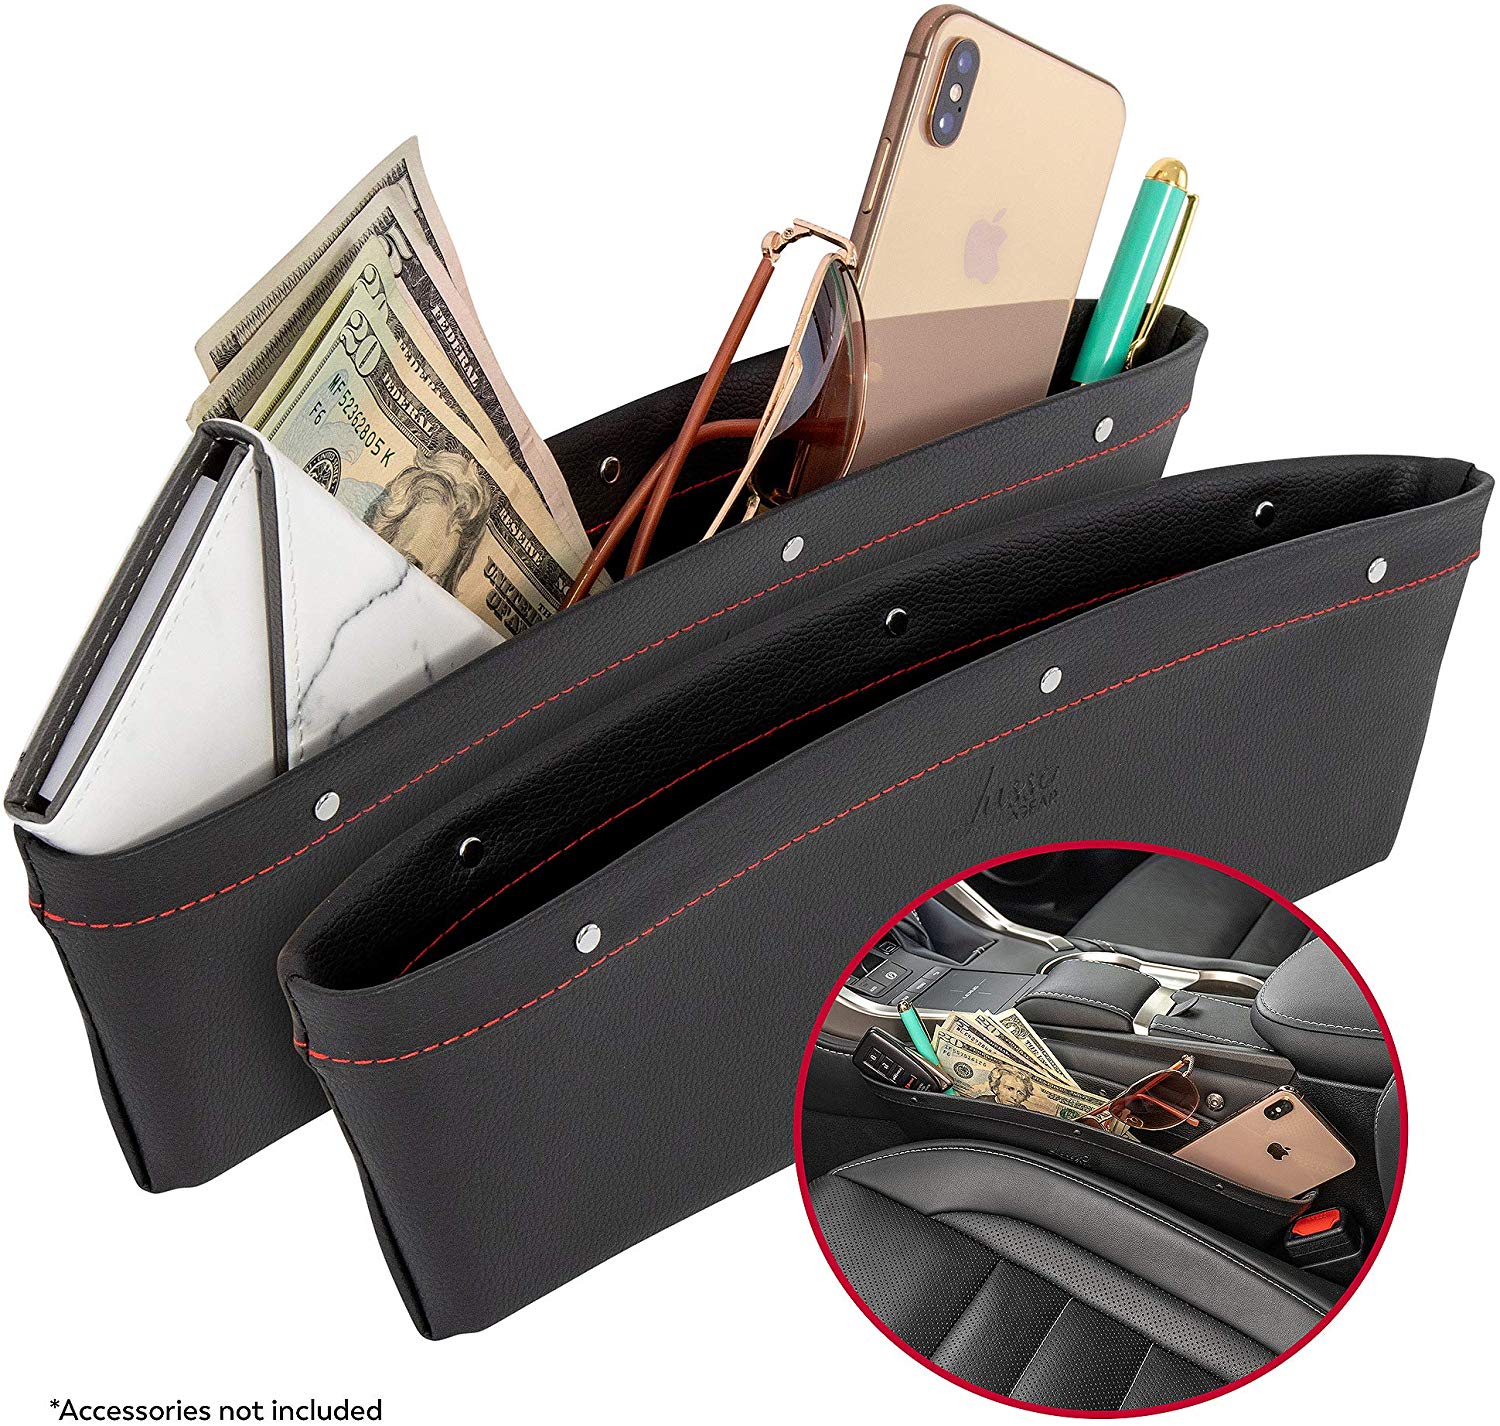 2 in 1 Car Seat Gap Organizer | Universal Fit | Storage Pockets Adjust | 2 Set Car Seat Crevice Storage Box | Helps Reduce Distracted Driving & Holds Phone Money Cards Keys Remote | Red Stitching